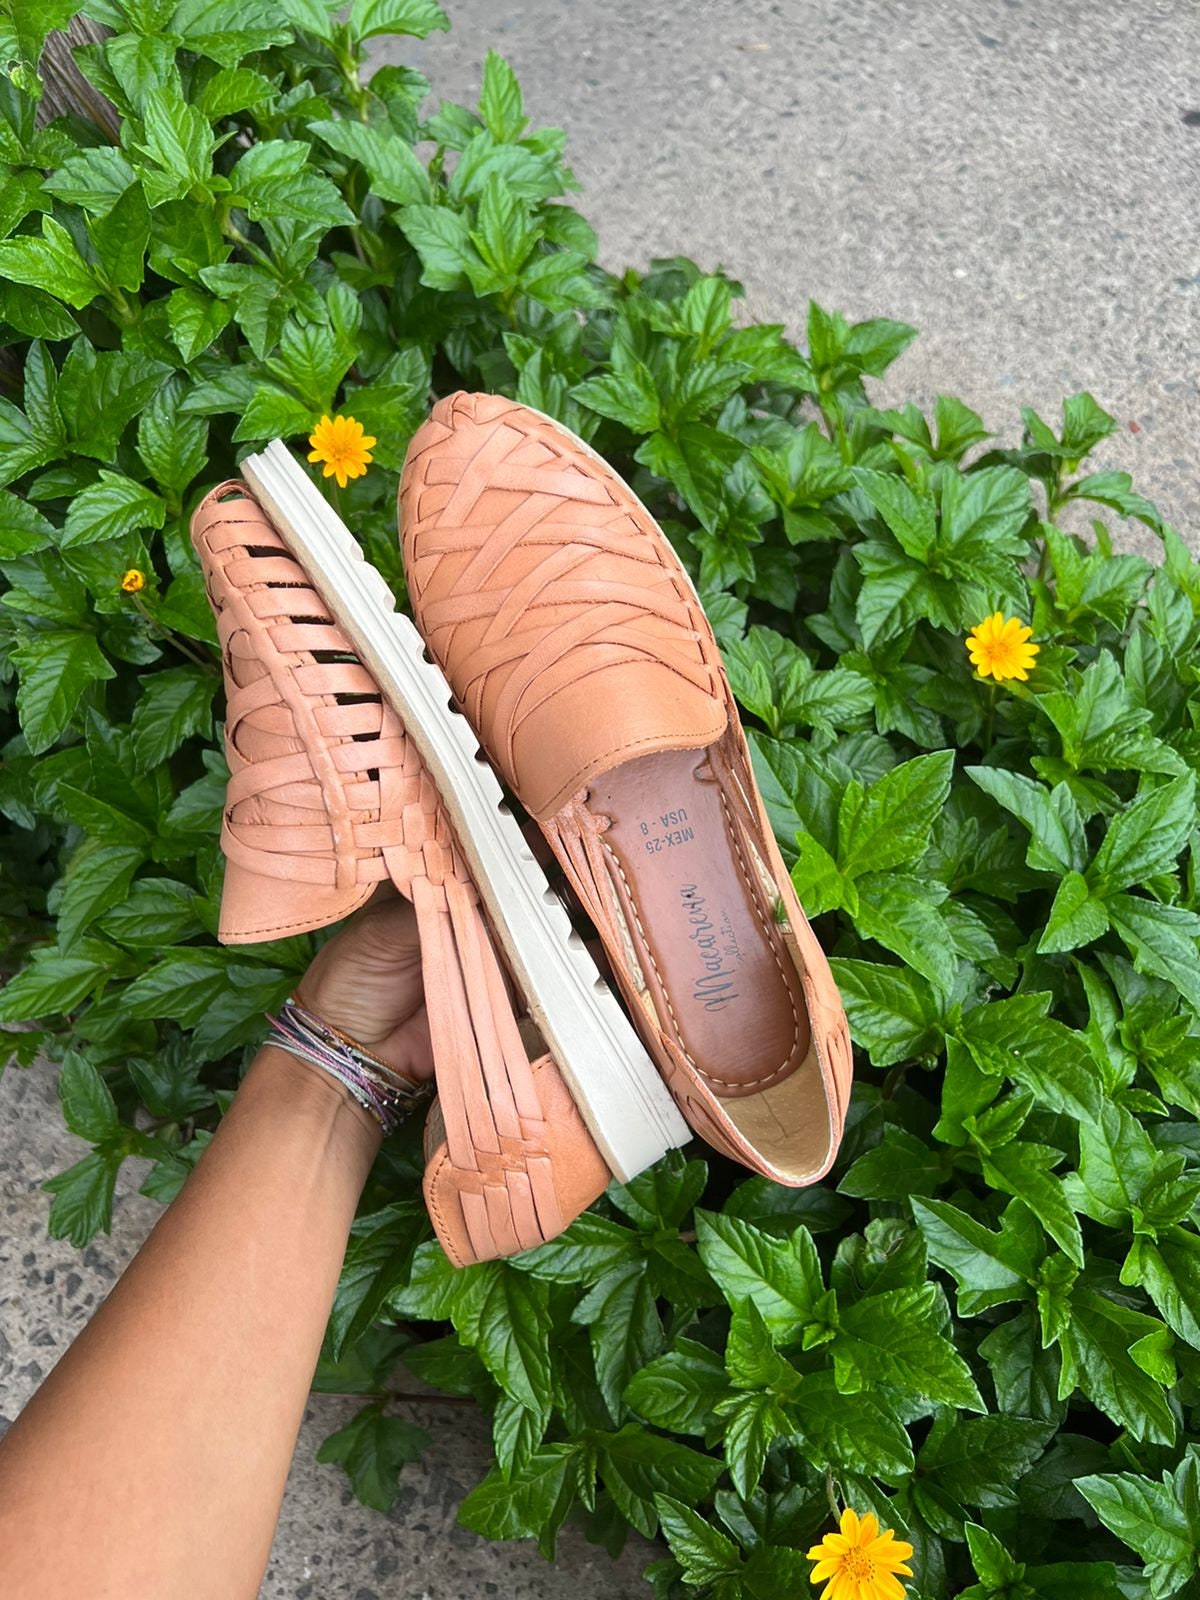 Huarache Sandal Hippie Tan Vintage Mexican Style Colorful Mexican Leather Huaraches